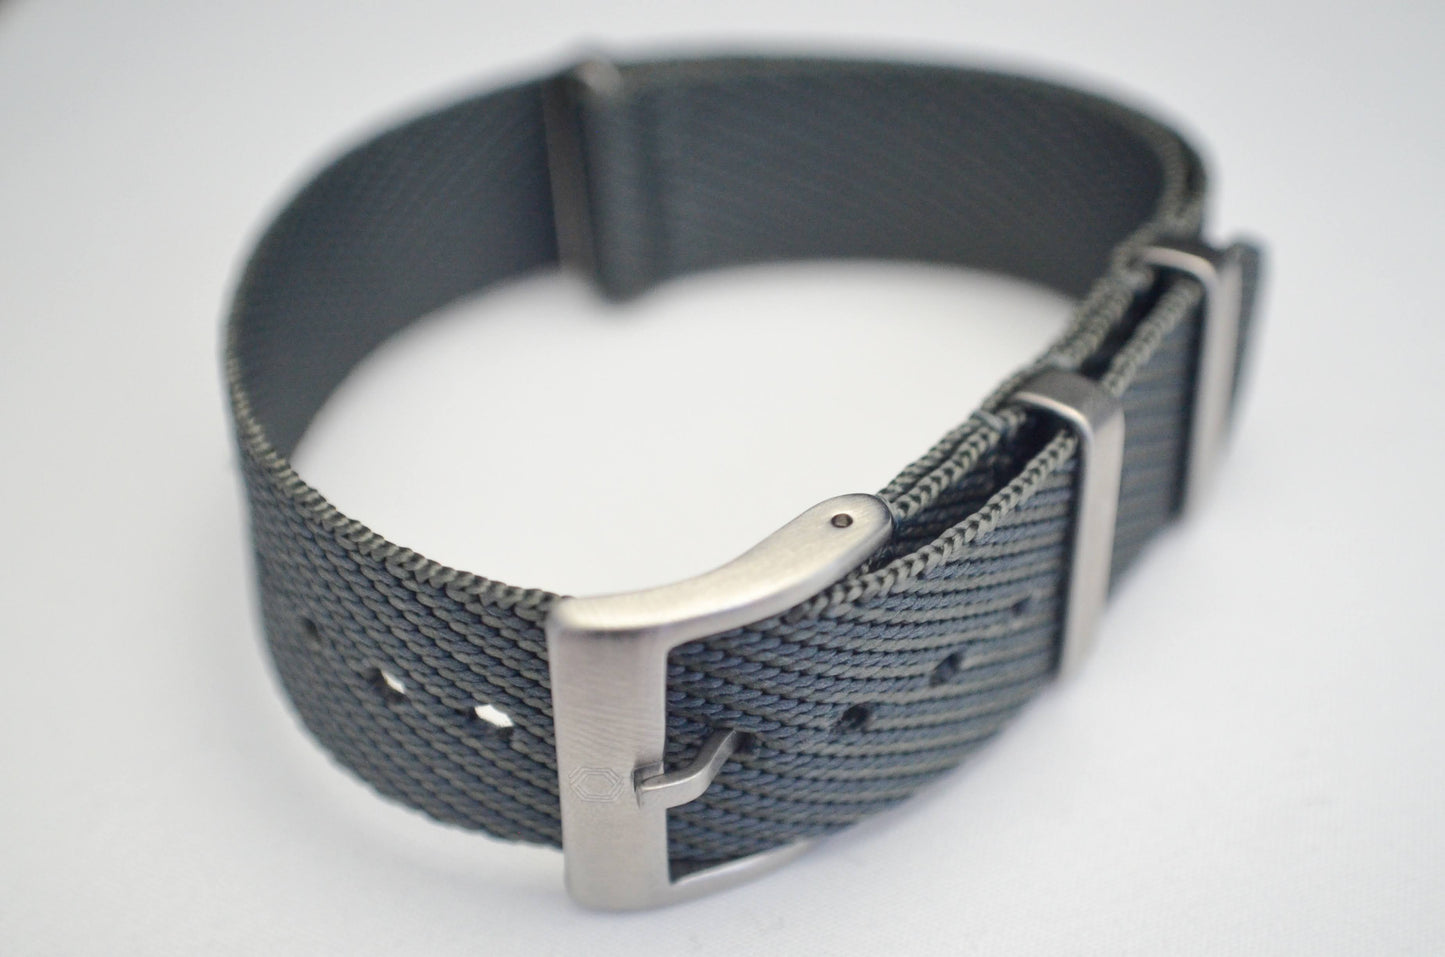 The 'Prince Kier' - Traditional grey military watch strap made of a soft double weaved nylon